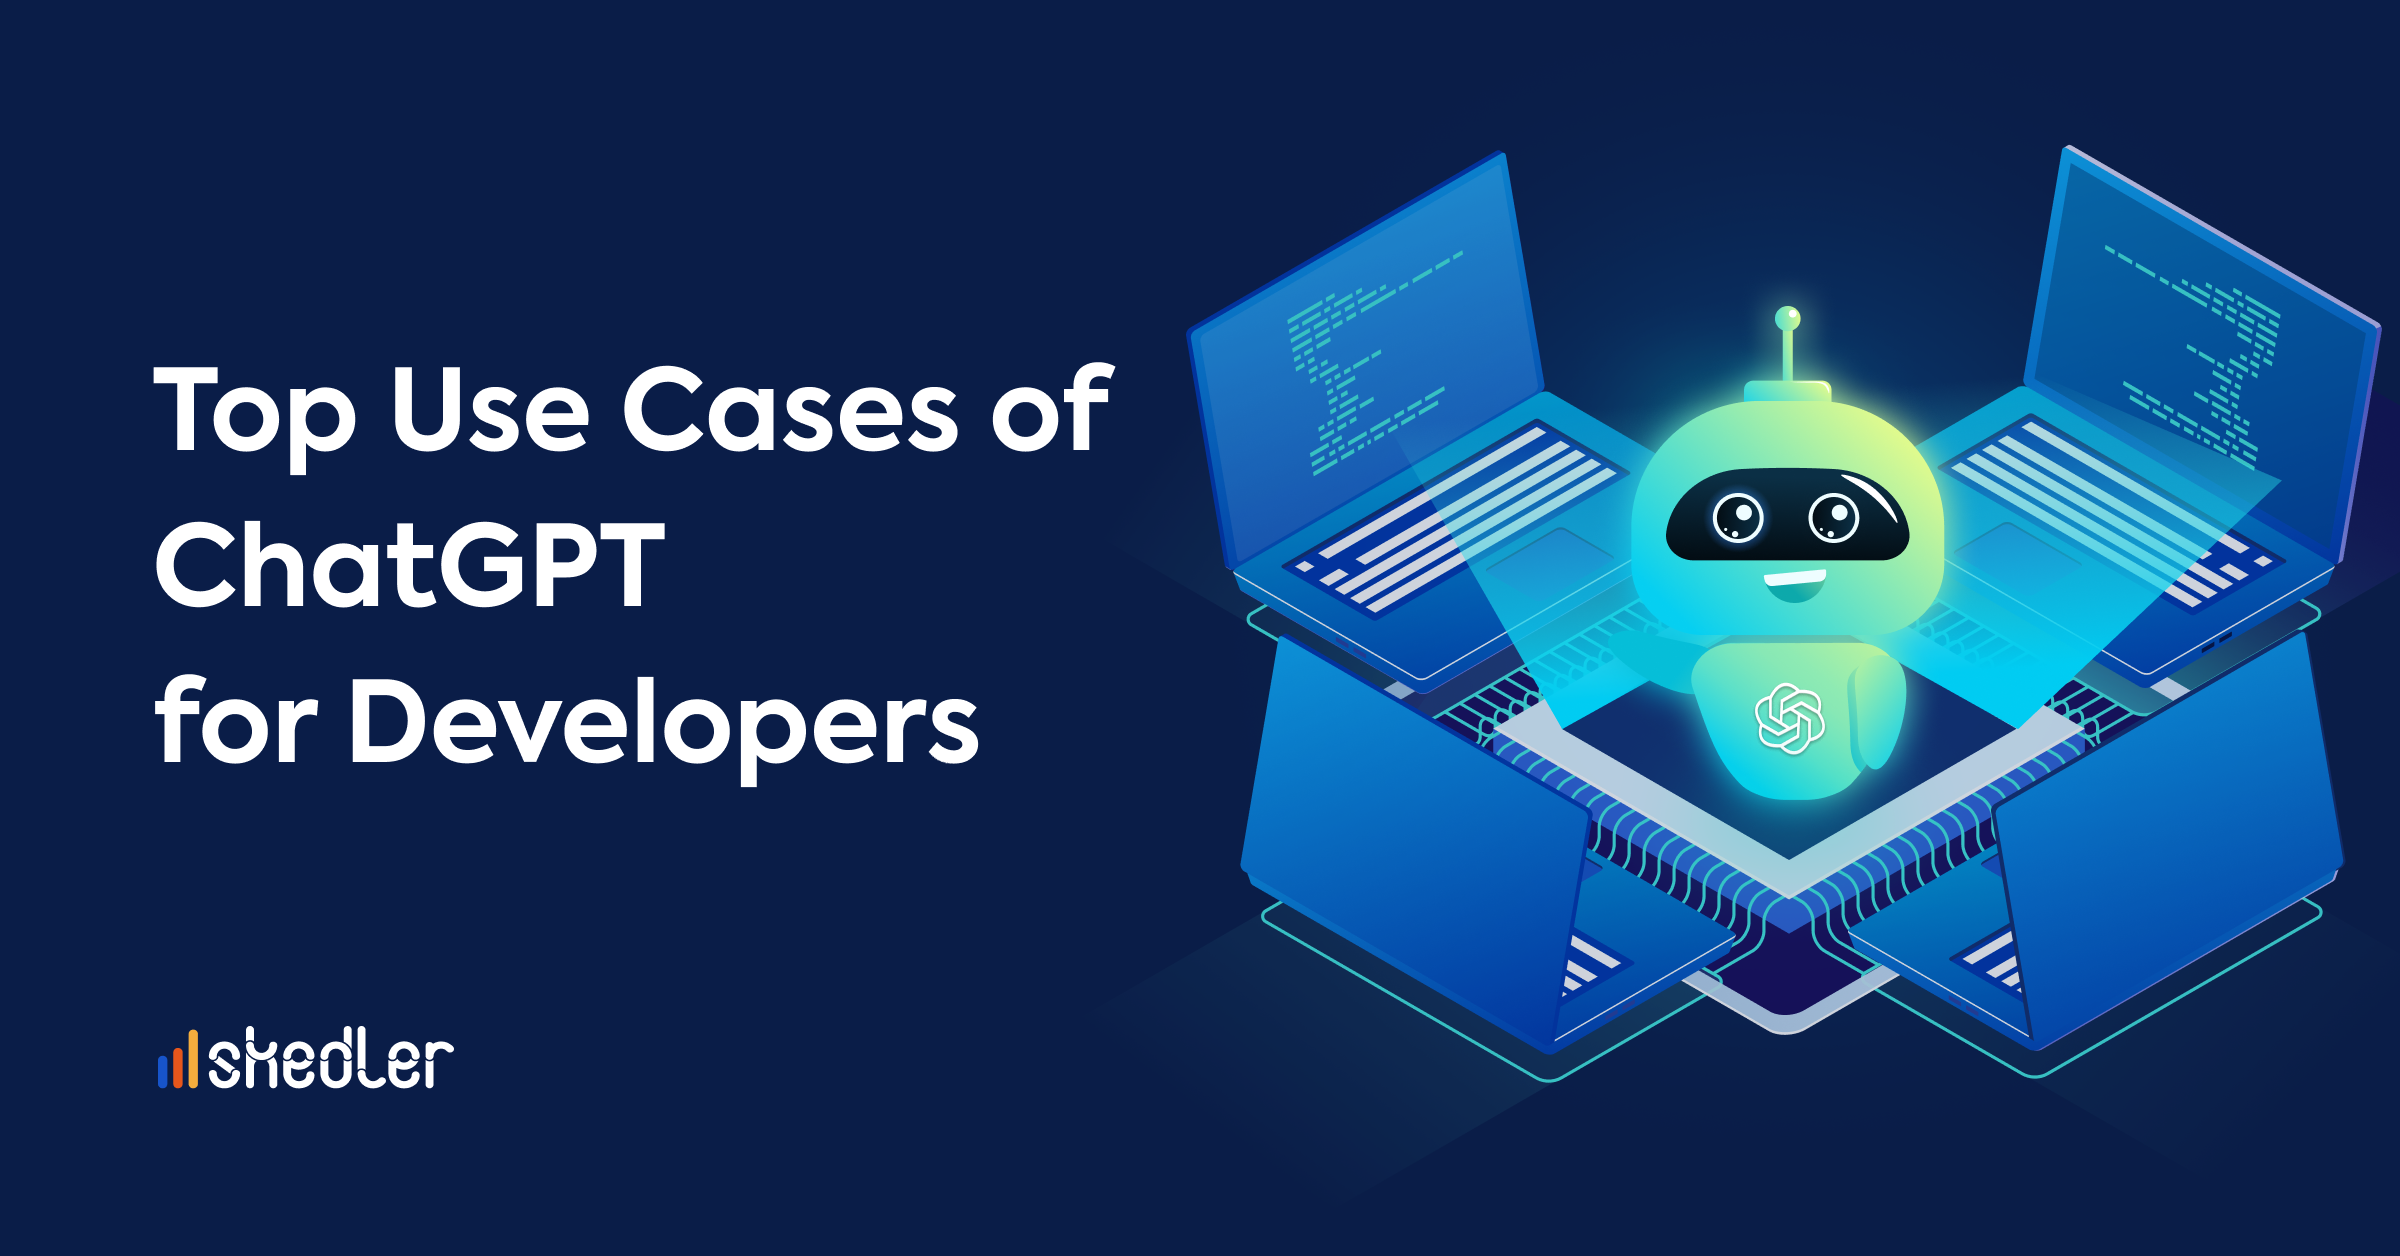 Top Use Cases of ChatGPT for Developers